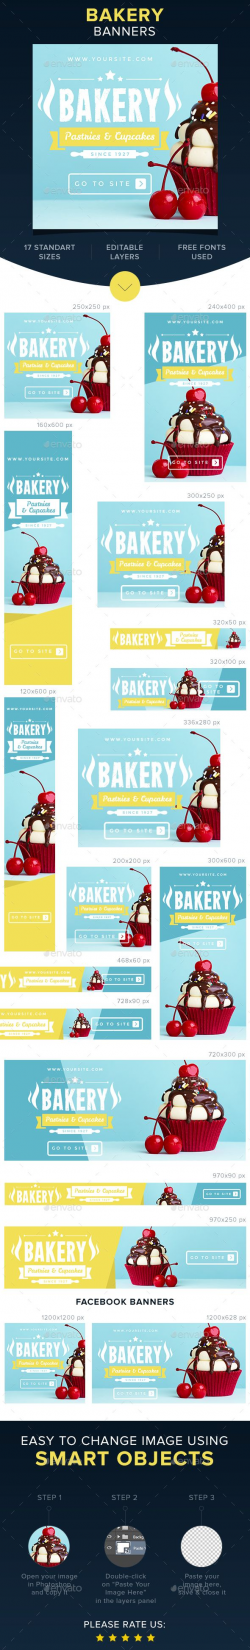 978 best banner images on Pinterest | Web banners, Banner template ...